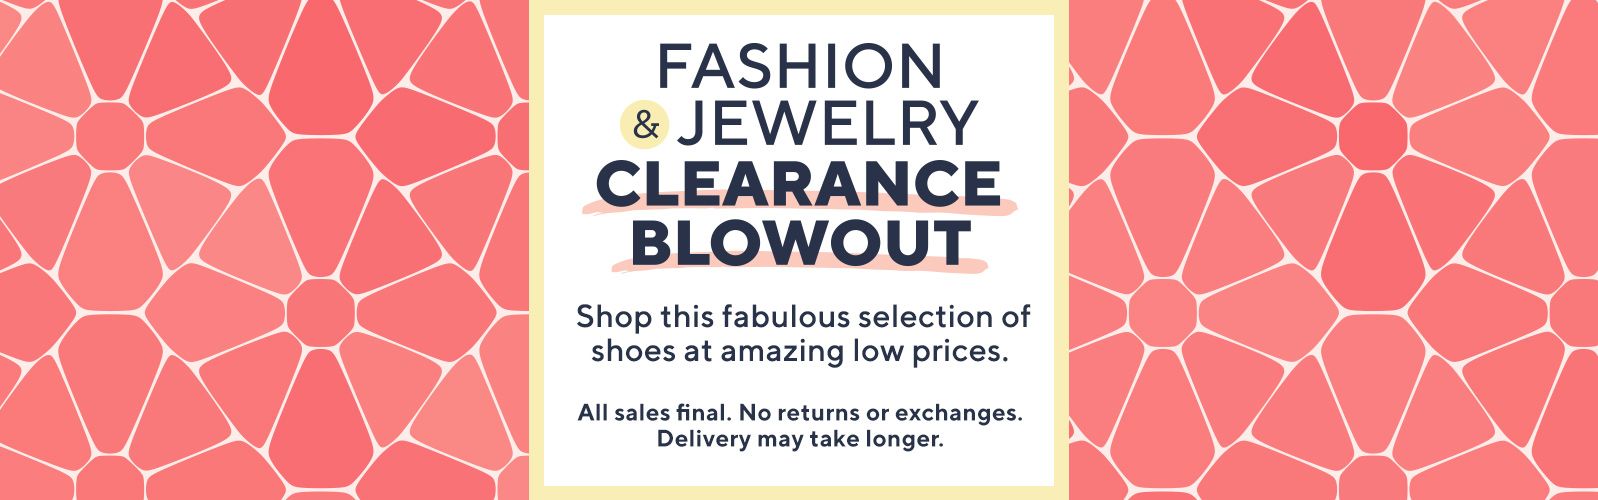 Fashion & Jewelry Clearance Blowout - Shop this fabulous selection of shoes at amazing low prices.   All sales final. No returns or exchanges. Delivery may take longer.